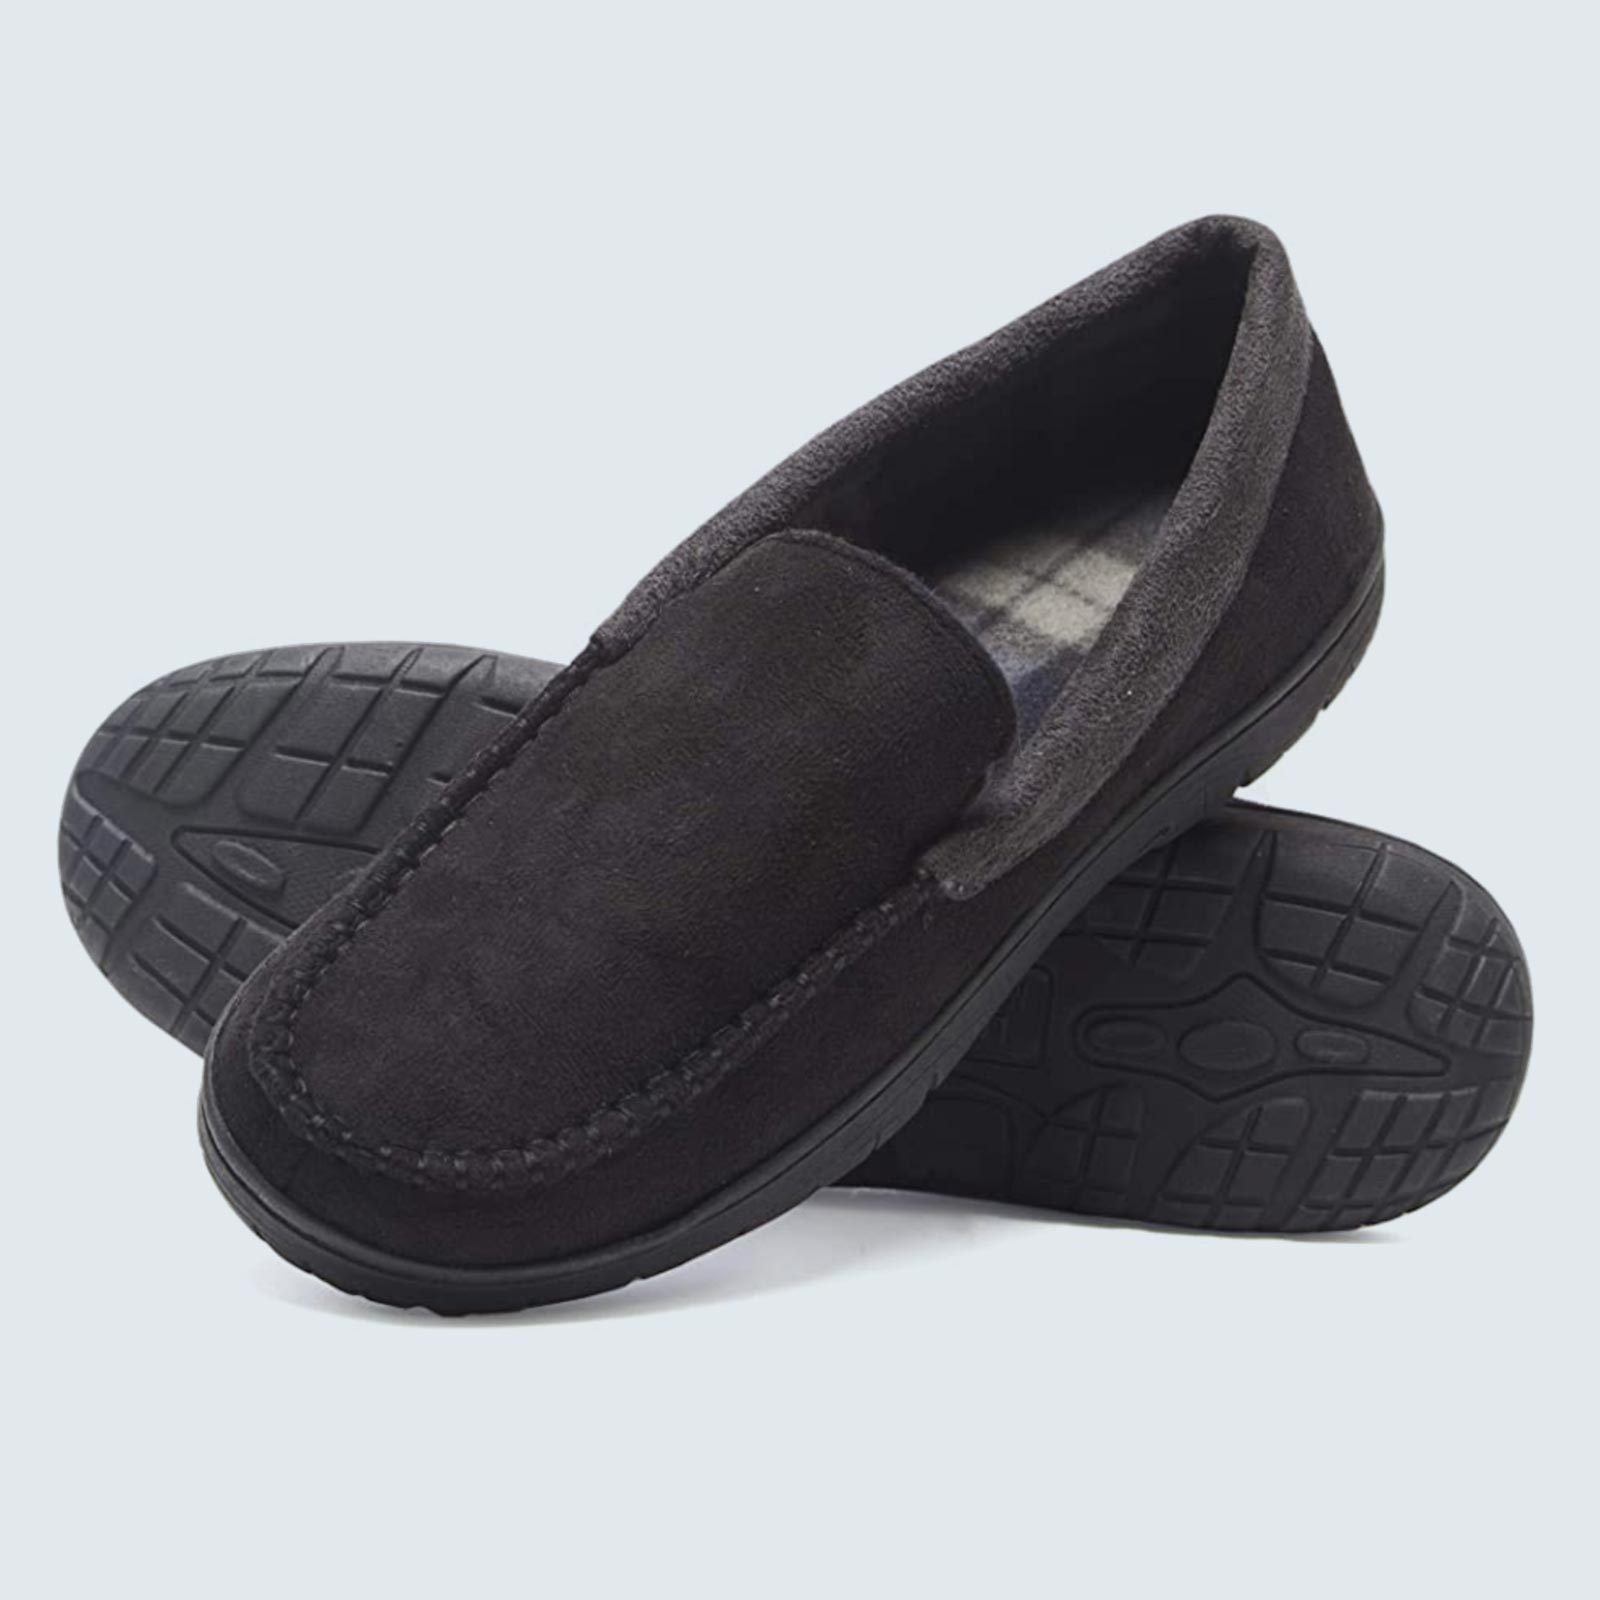 Best Men's Slippers 2021 | Comfy Men's for the House and More